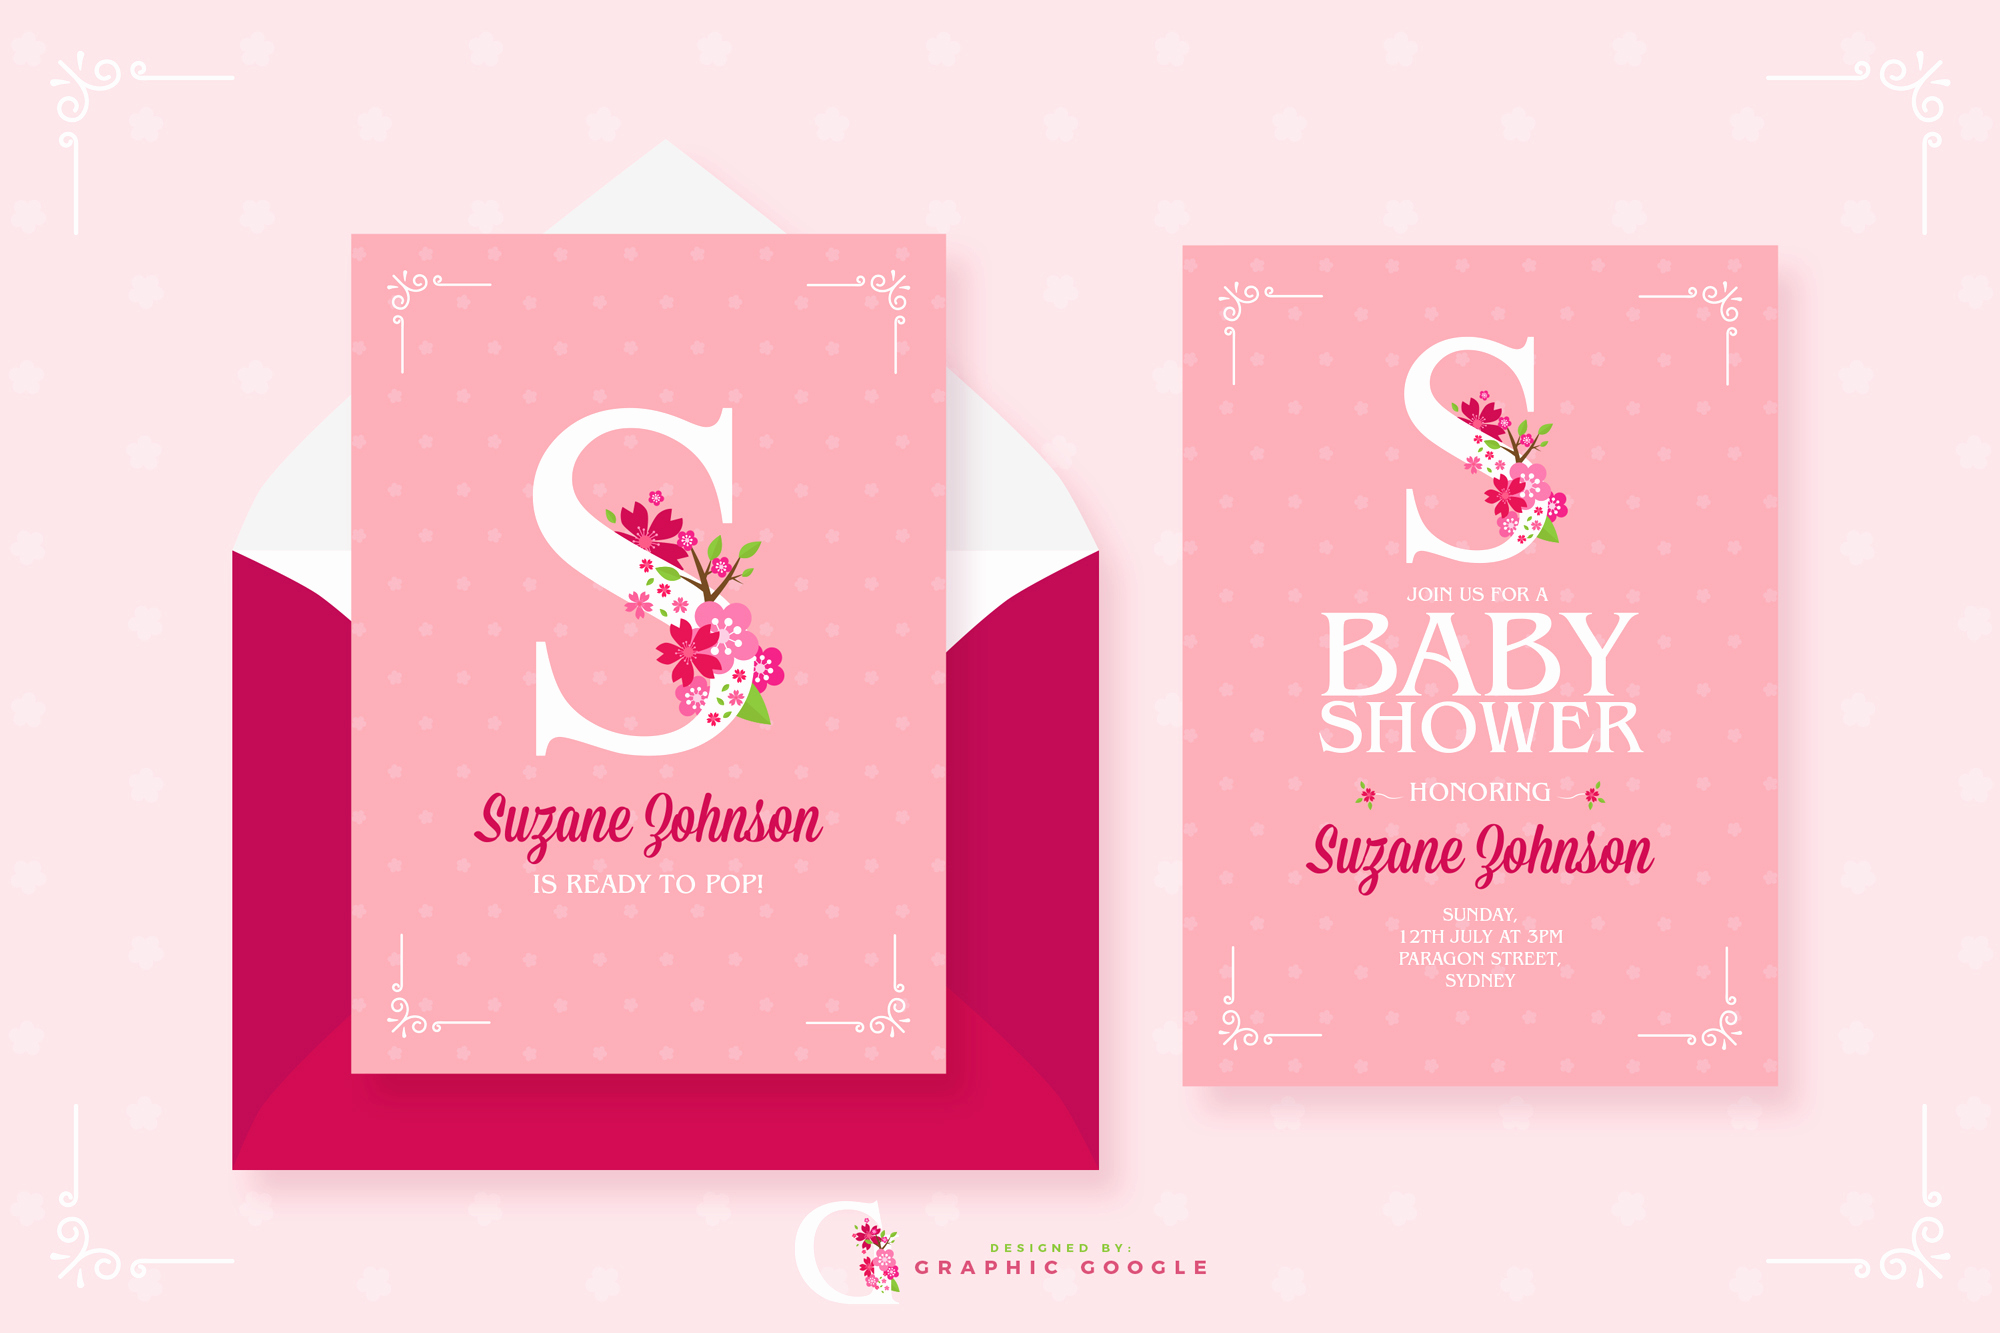 Free Baby Shower Invitation Templates New Baby Shower Free Invitation Templates Wooskins